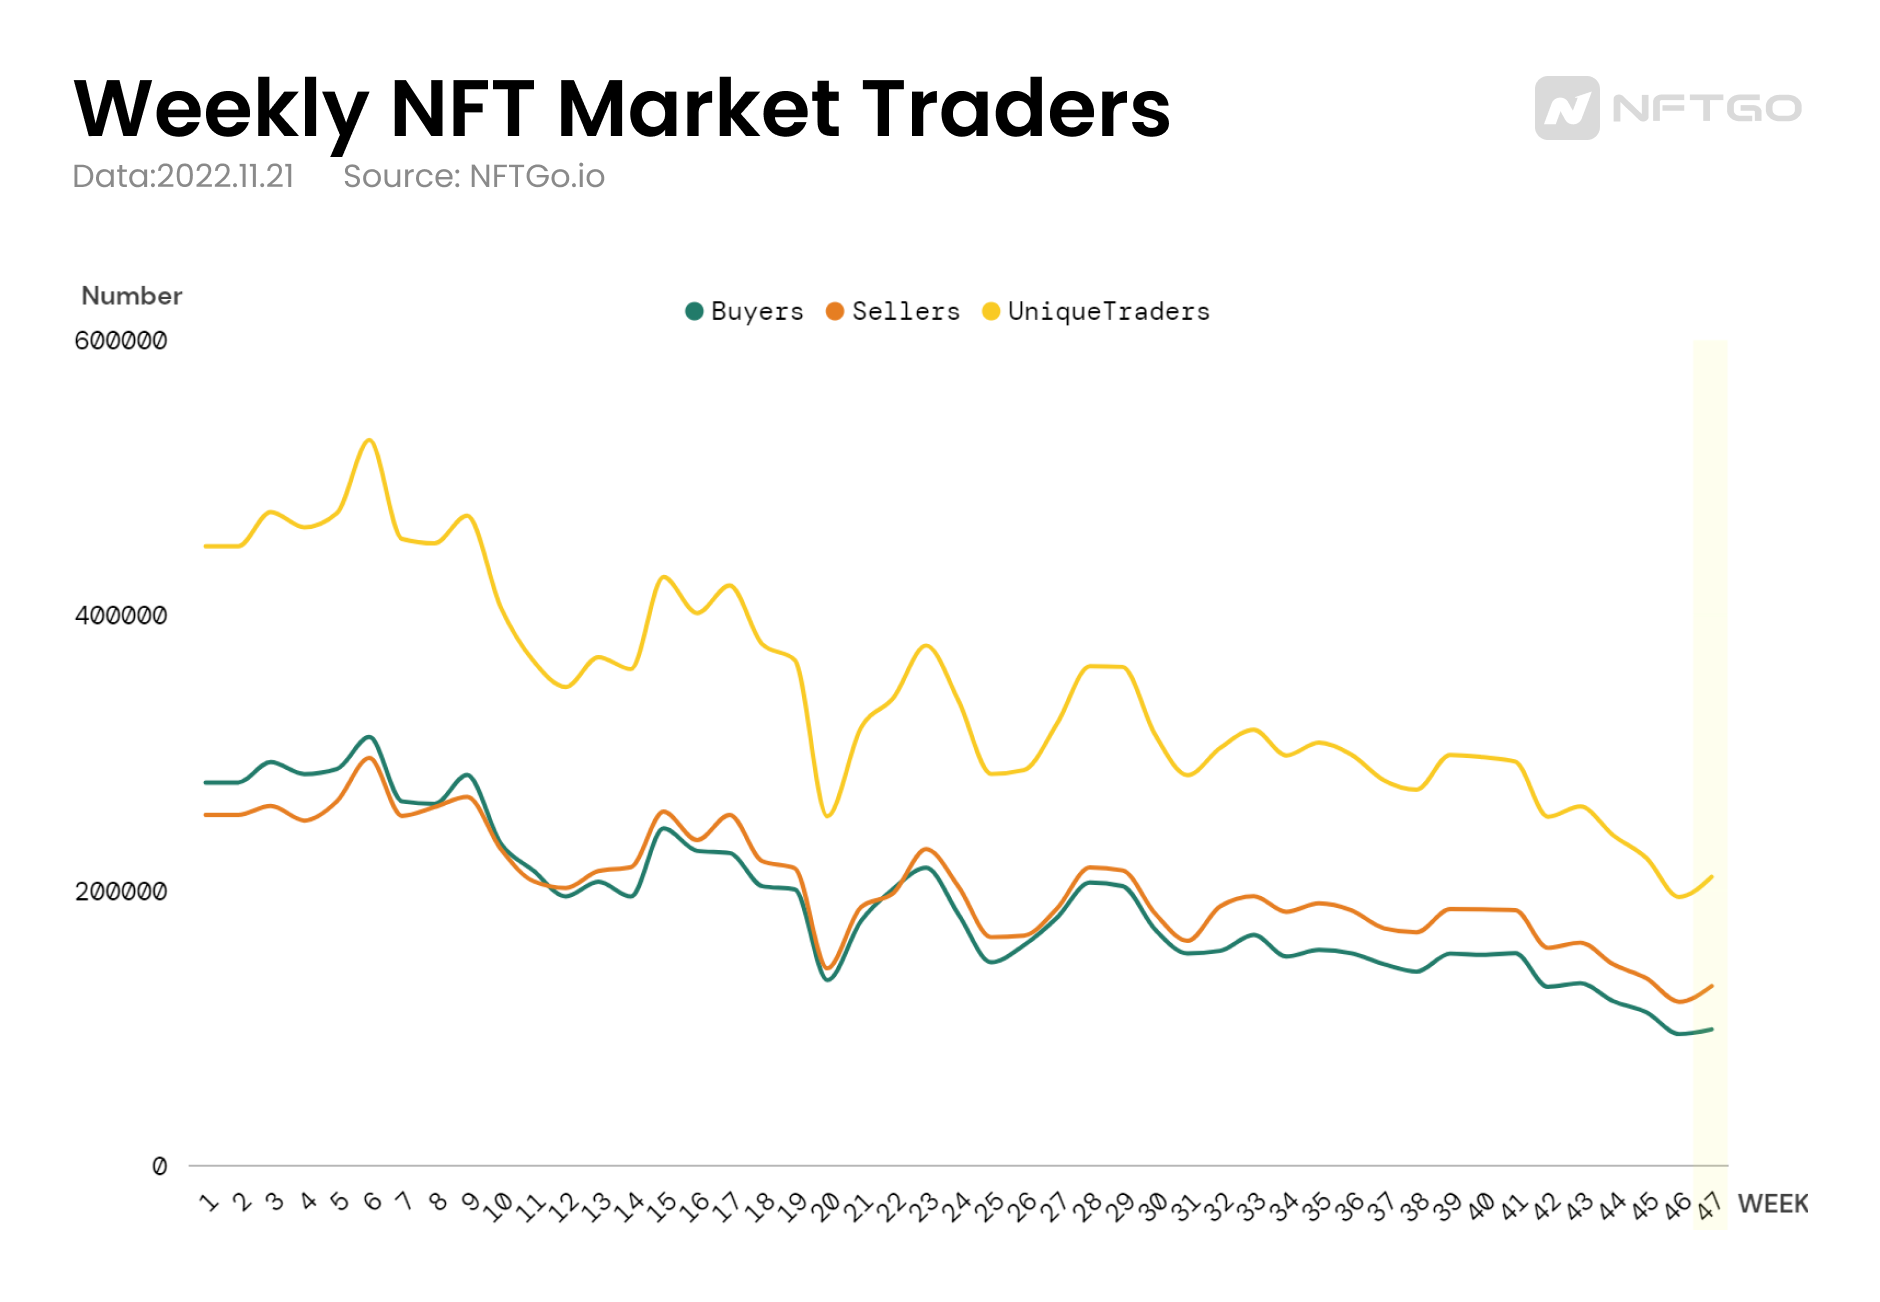 Weekly Trend of NFT Traders (Source: nftgo.io)